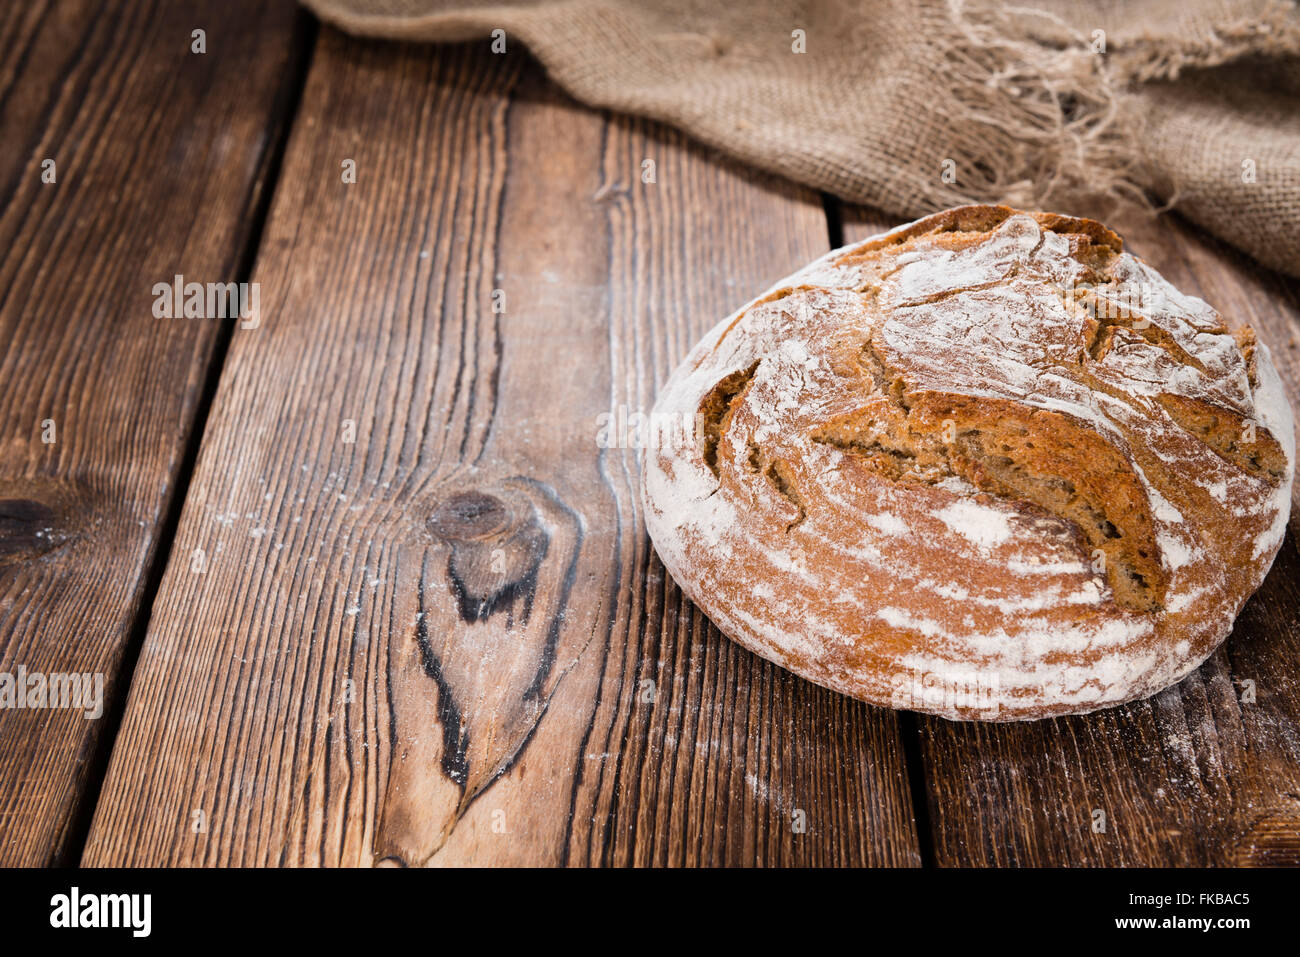 Bread on dark rustic wooden background as detailed close-up shot Stock Photo